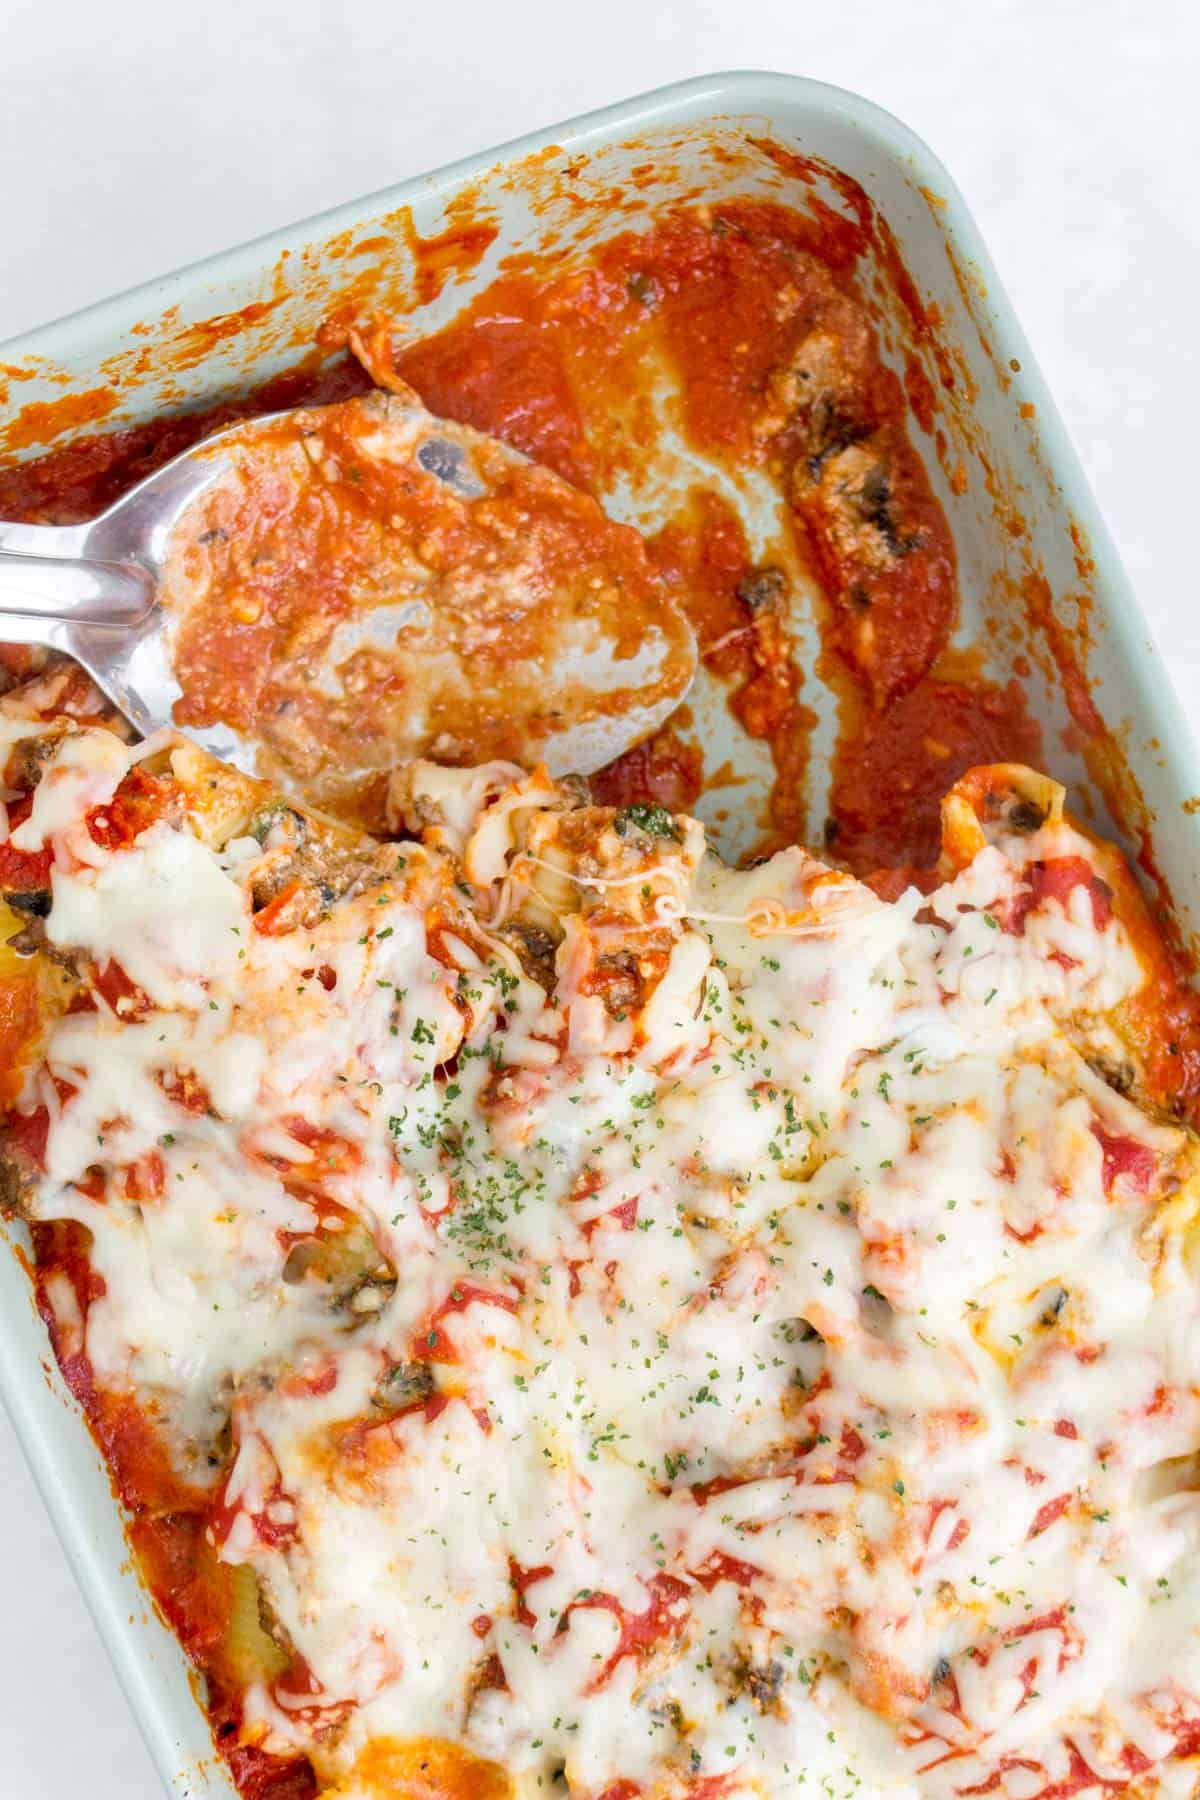 Casserole dish of stuffed shells with a serving spoon.